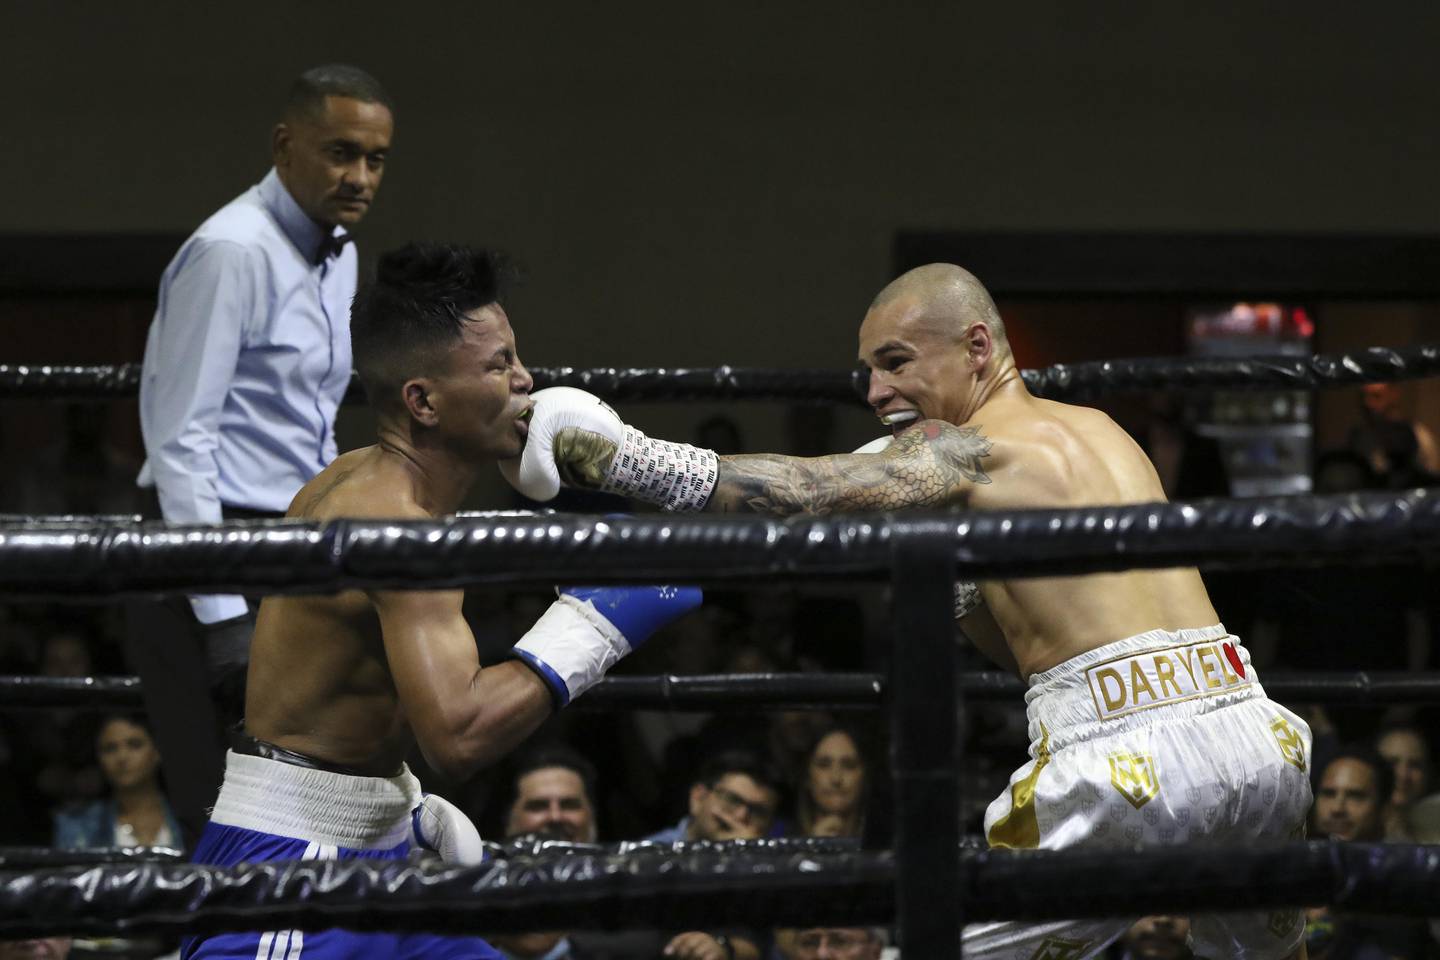 David “Medalita” Jimenez increases his unbeaten in-ring record and points to the US